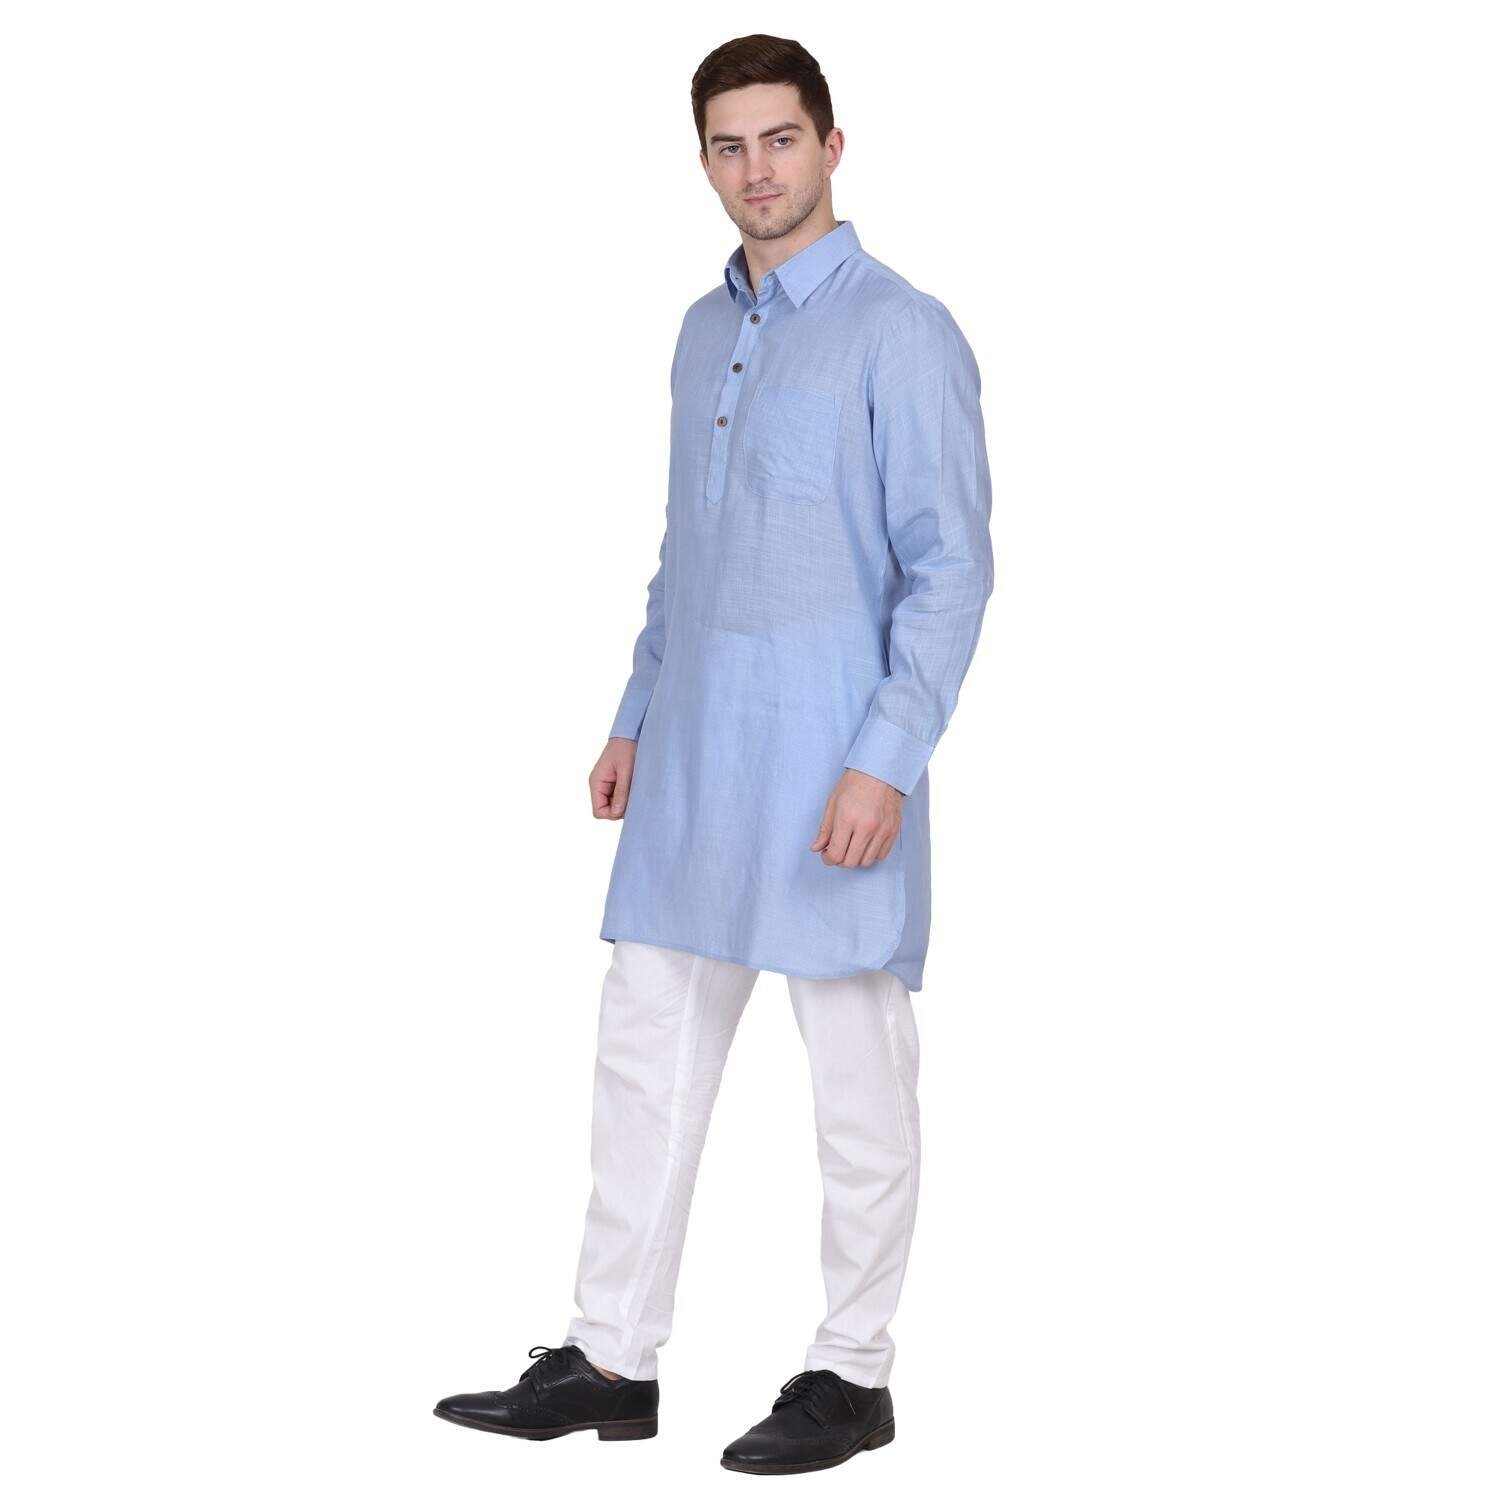 MARSHALL LINEN ORGANZA PATHANI SUIT LIGHT BLUE COLOR